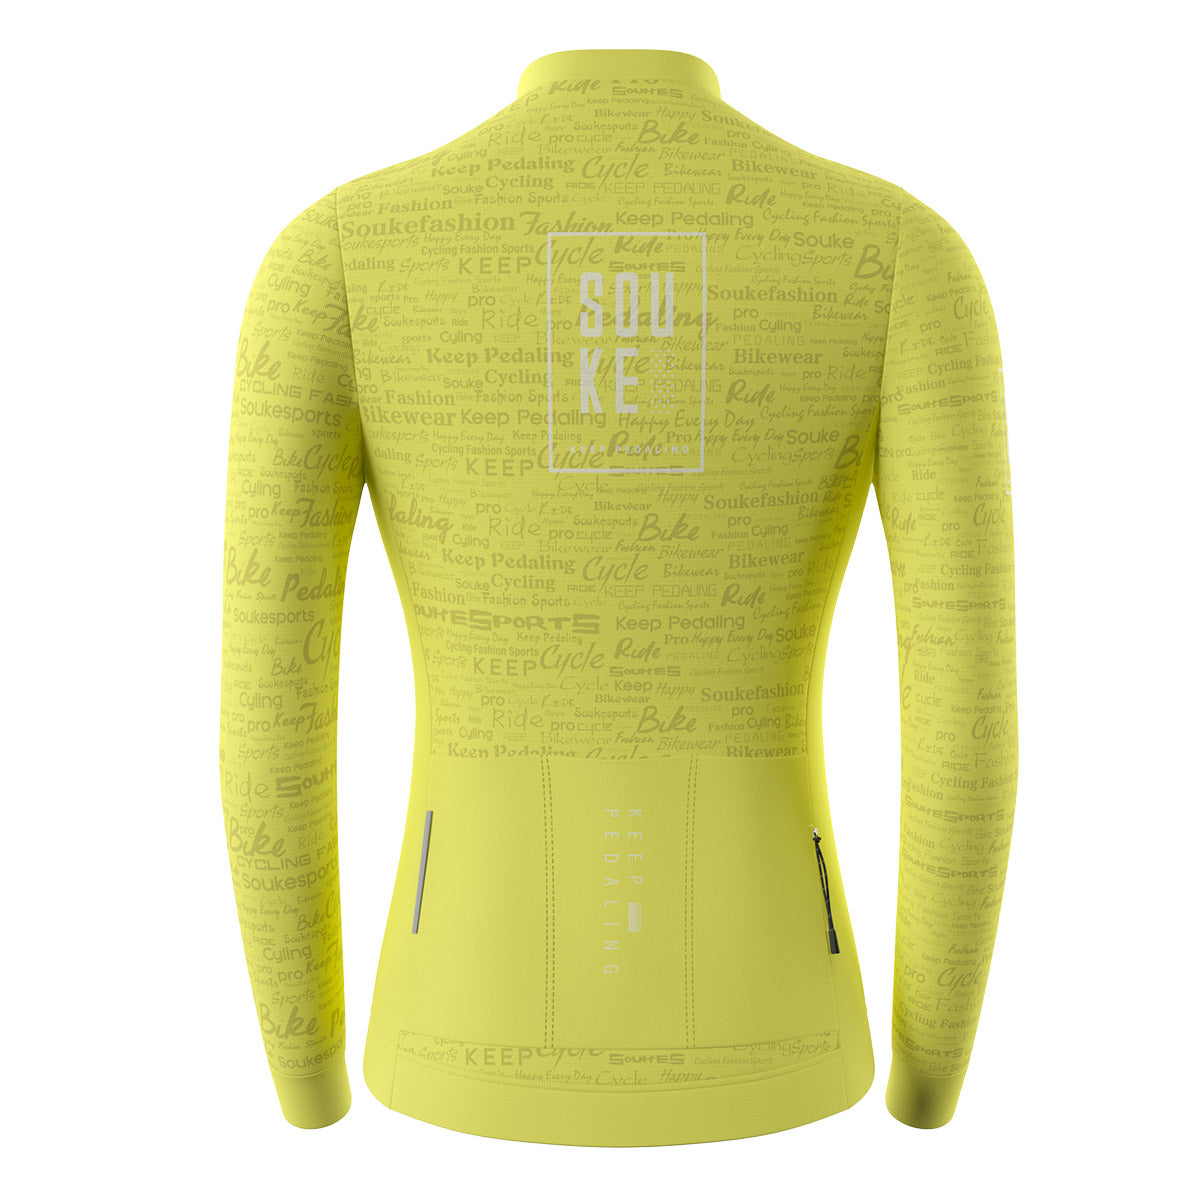 cycling long sleeve jersey, Graphene jersey,jersey for winter,Lime Yellow long jersey,jersey for winter and autumn, cold weather jersey (6805613052017)